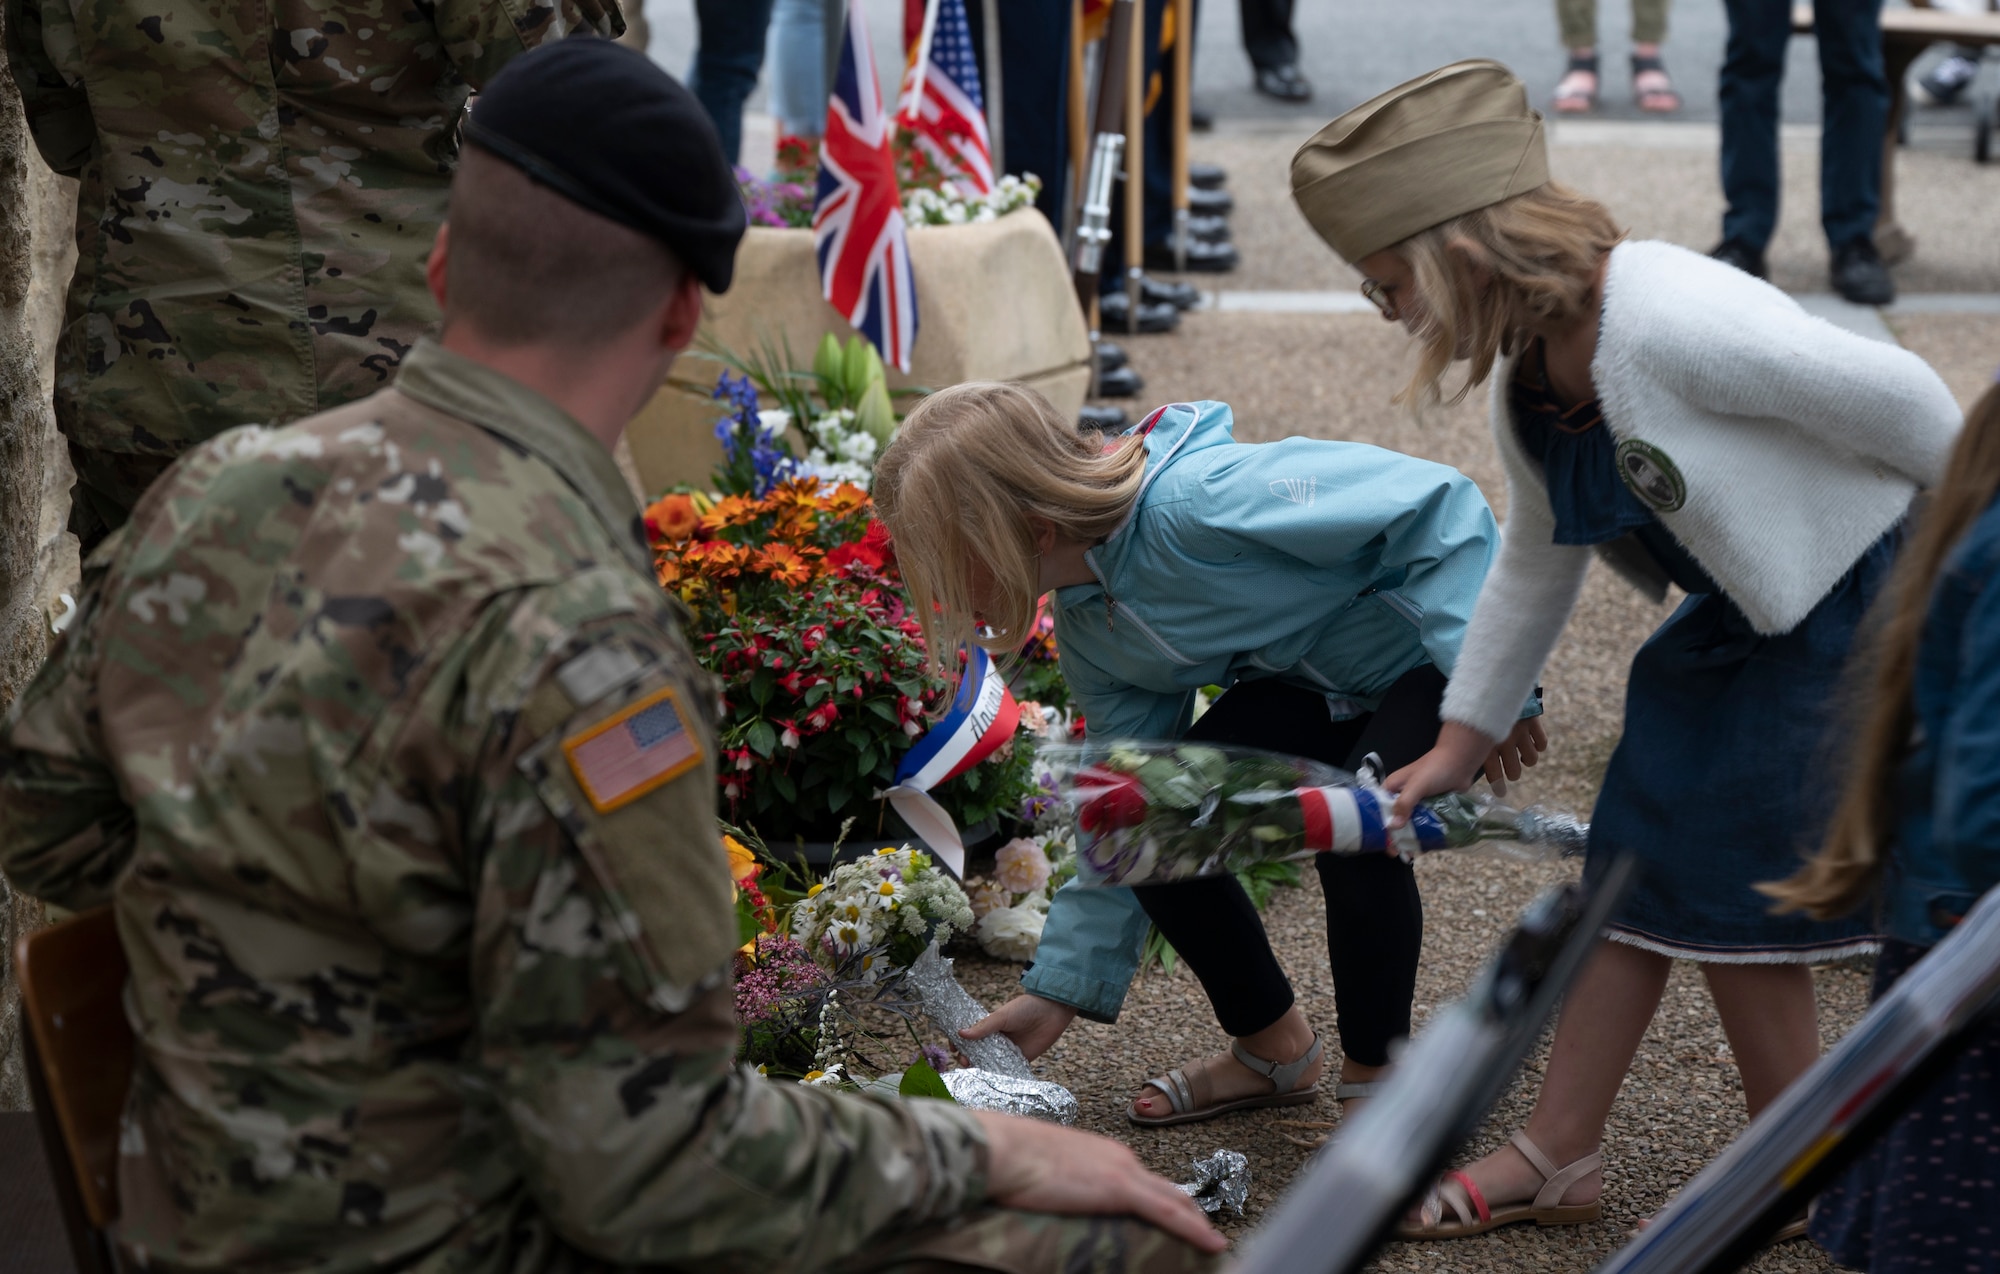 Children place flowers on a memorial during a D-Day ceremony at Negreville, France,  June 3, 2022. Negreville hosted their 24th annual D-Day memorial service as a way to thank those who fought and died to free them from occupation during World War II. (U.S. Air Force photo by Senior Airman Thomas Karol)